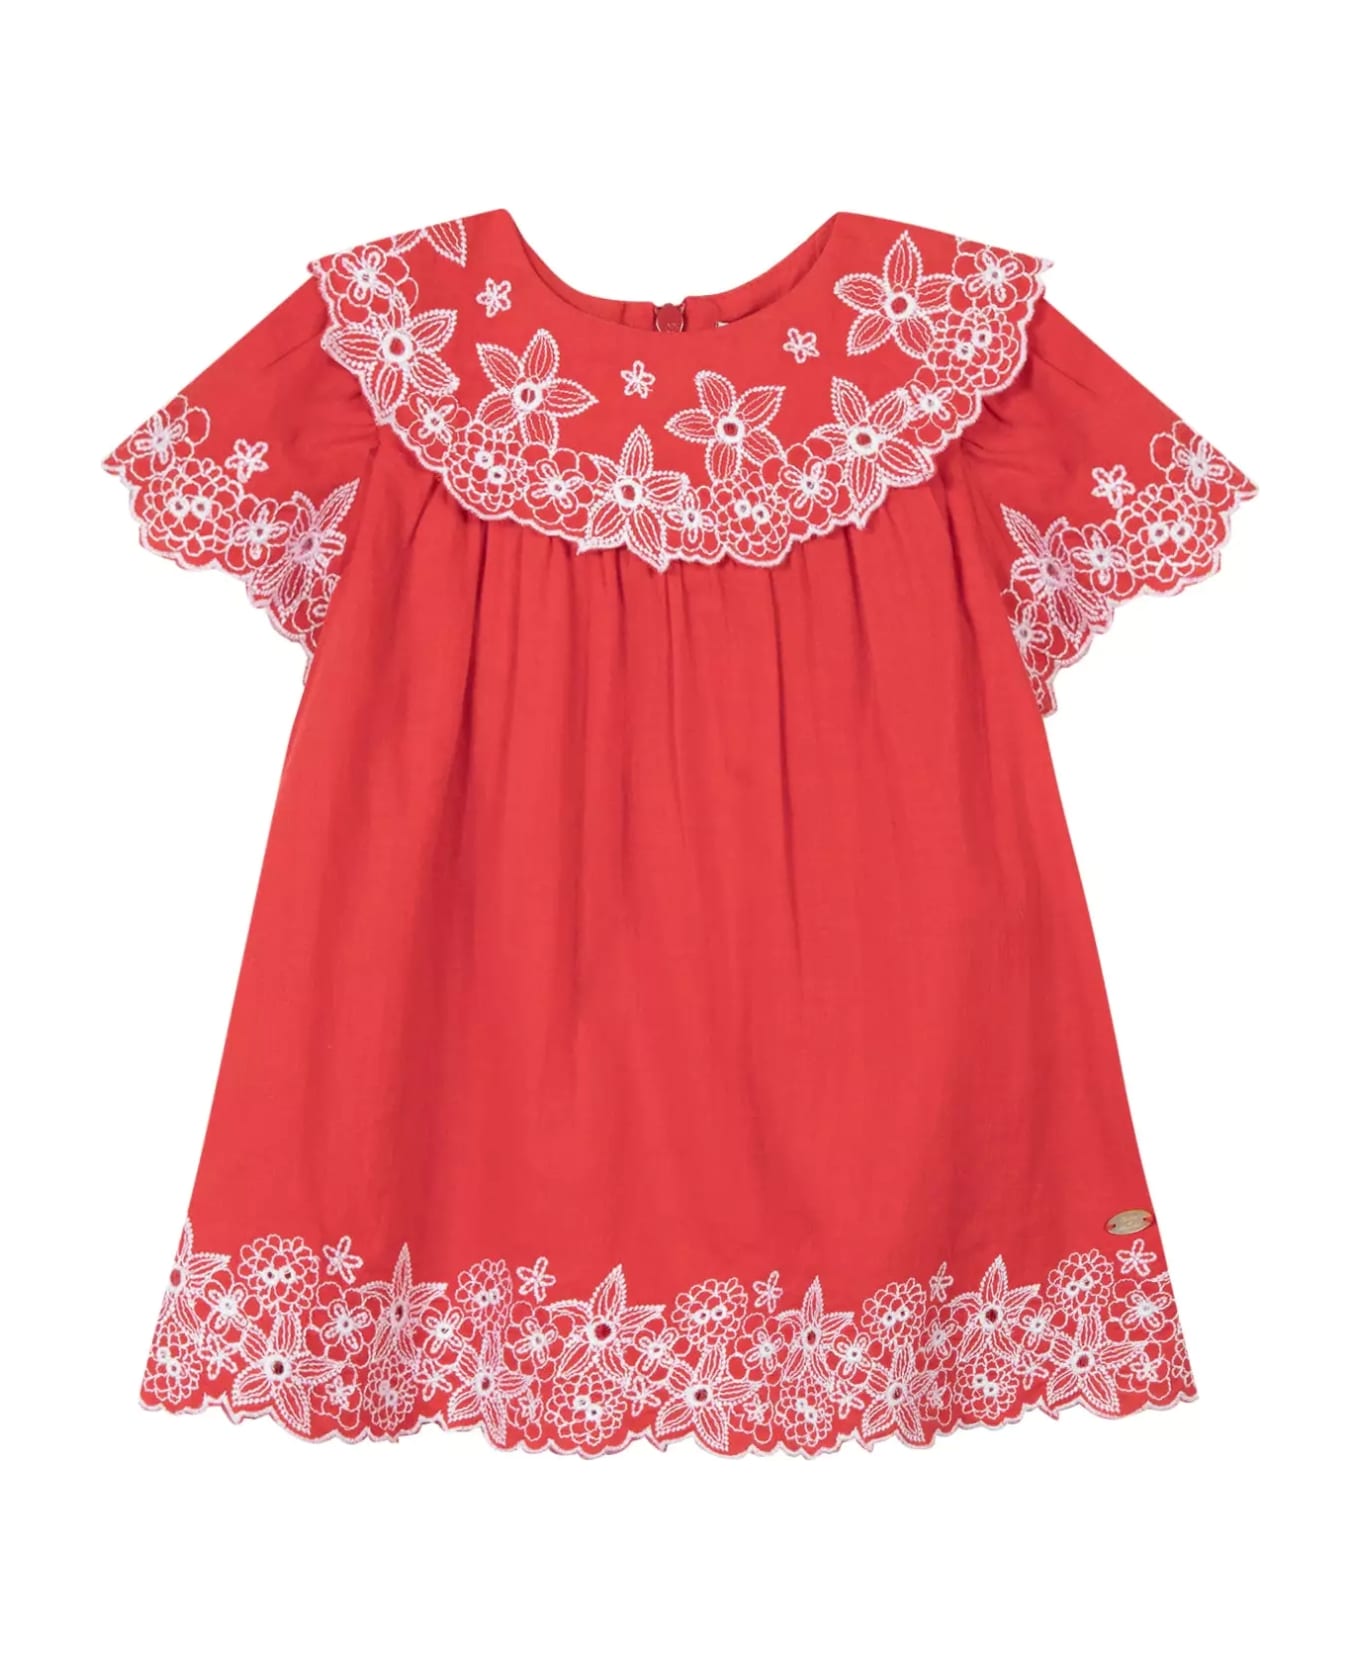 Tartine et Chocolat Dress With Embroidery - Red